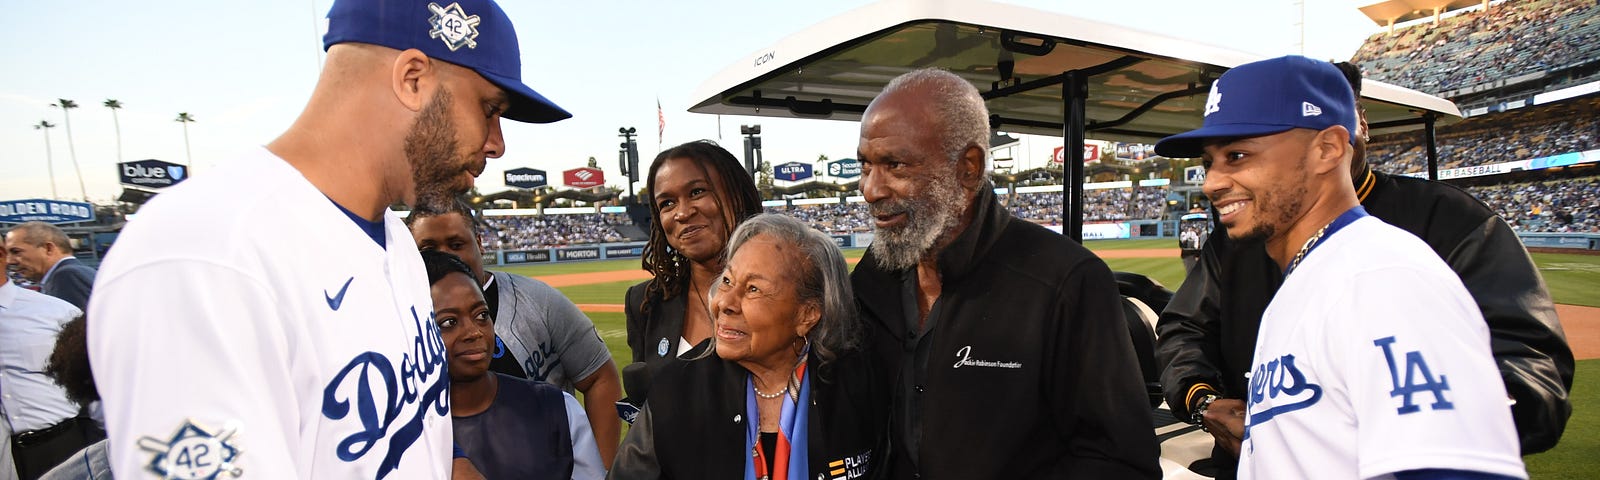 Dodgers celebrate Jackie Robinson Day with the Hall of Famer's family, by  Rowan Kavner